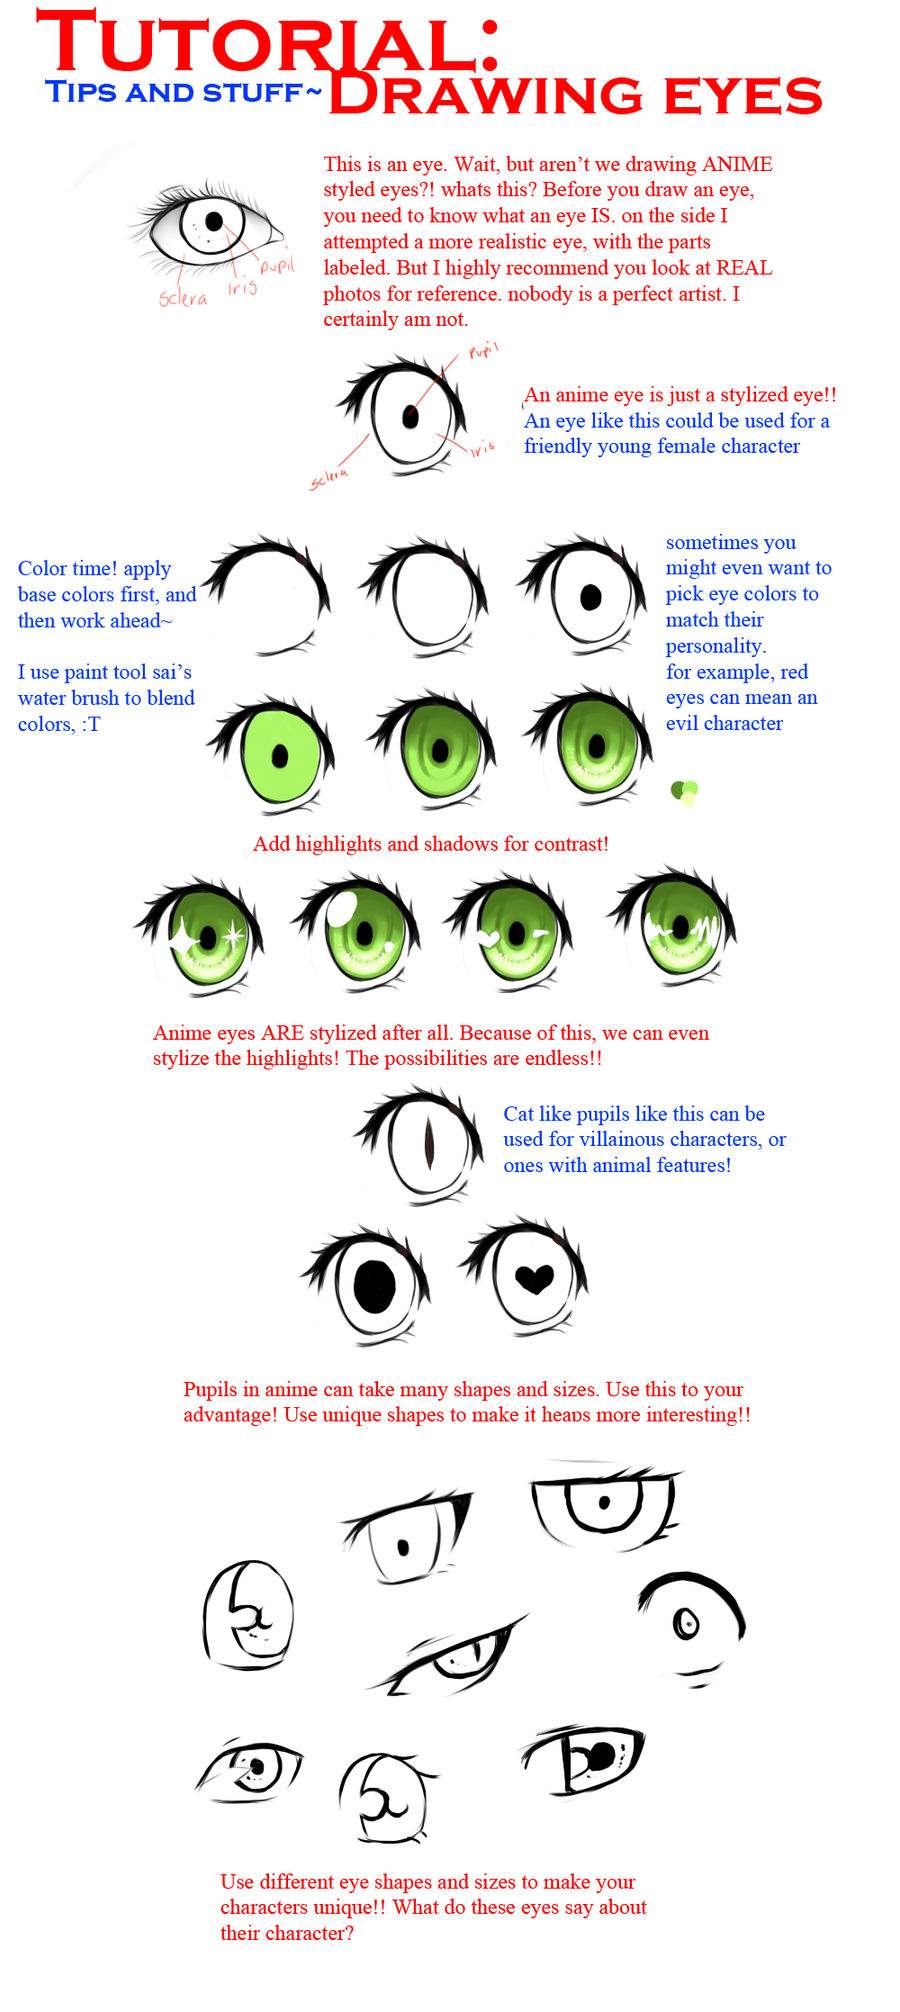 63 PAIRS OF FEMALE ANIME EYES - A Fun Project by aadisart on DeviantArt